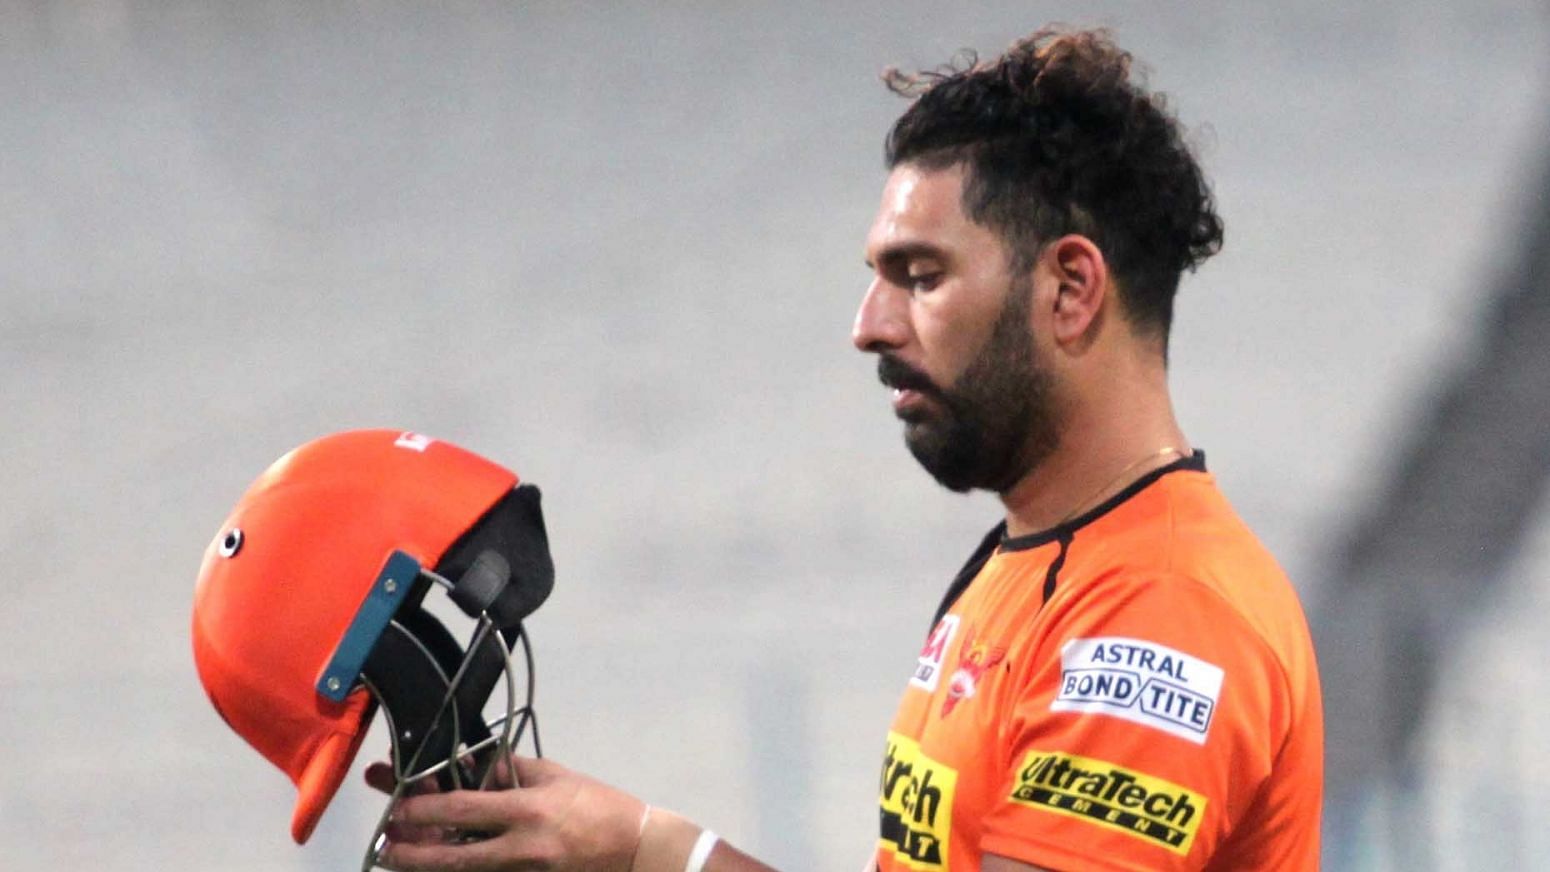 Yuvraj Singh was playing the first match after announcing his retirement last month.